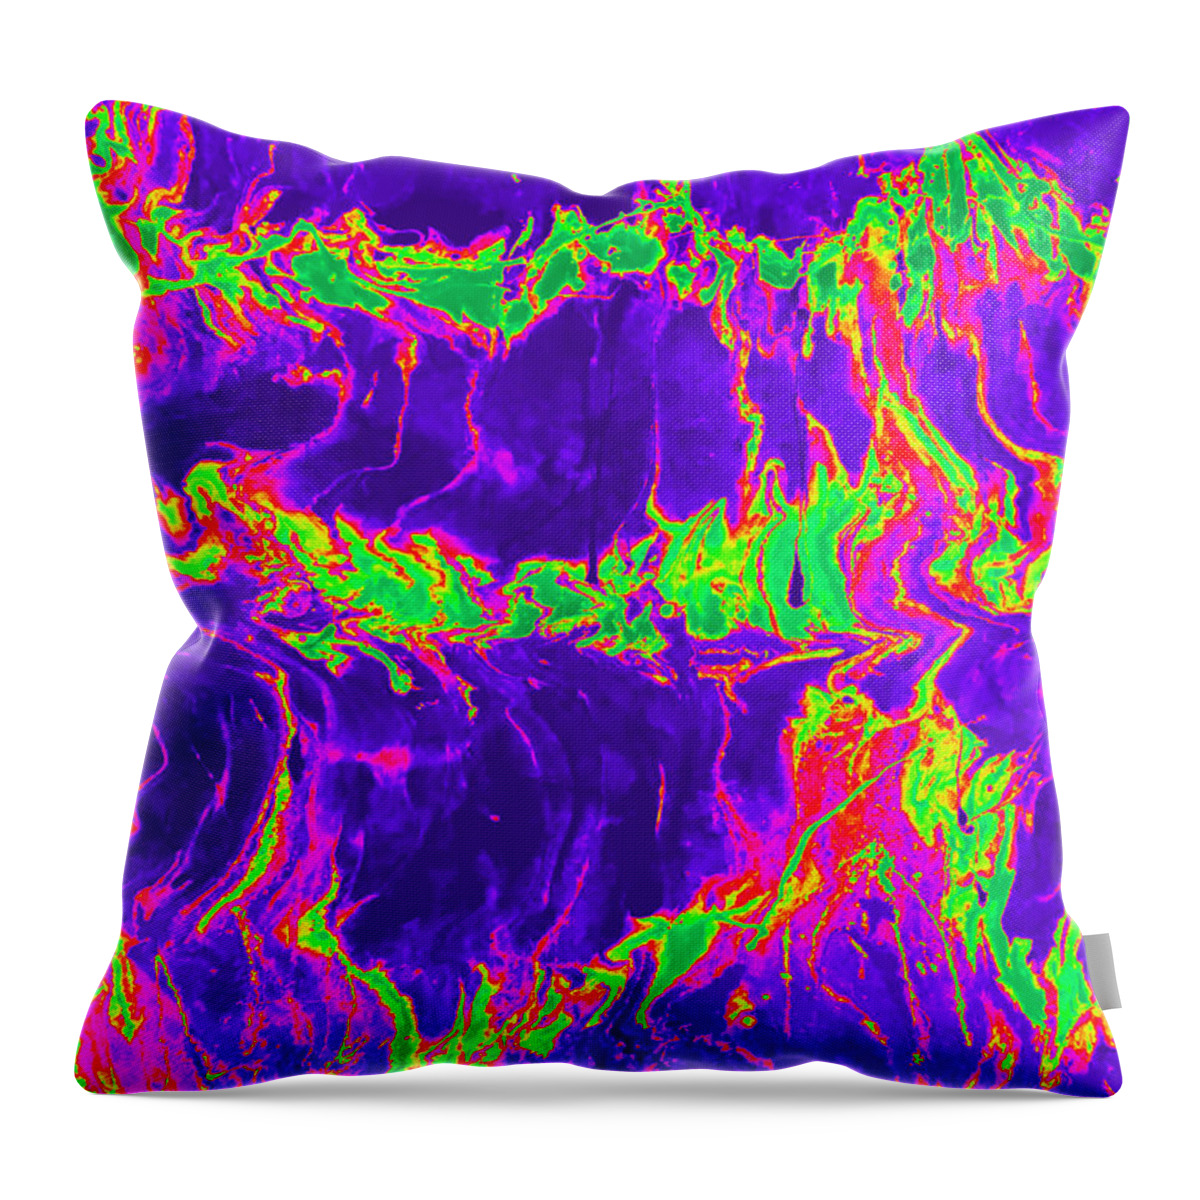 Resin Art Throw Pillow featuring the painting Psychedelic Series #1 #1 by Jane Biven